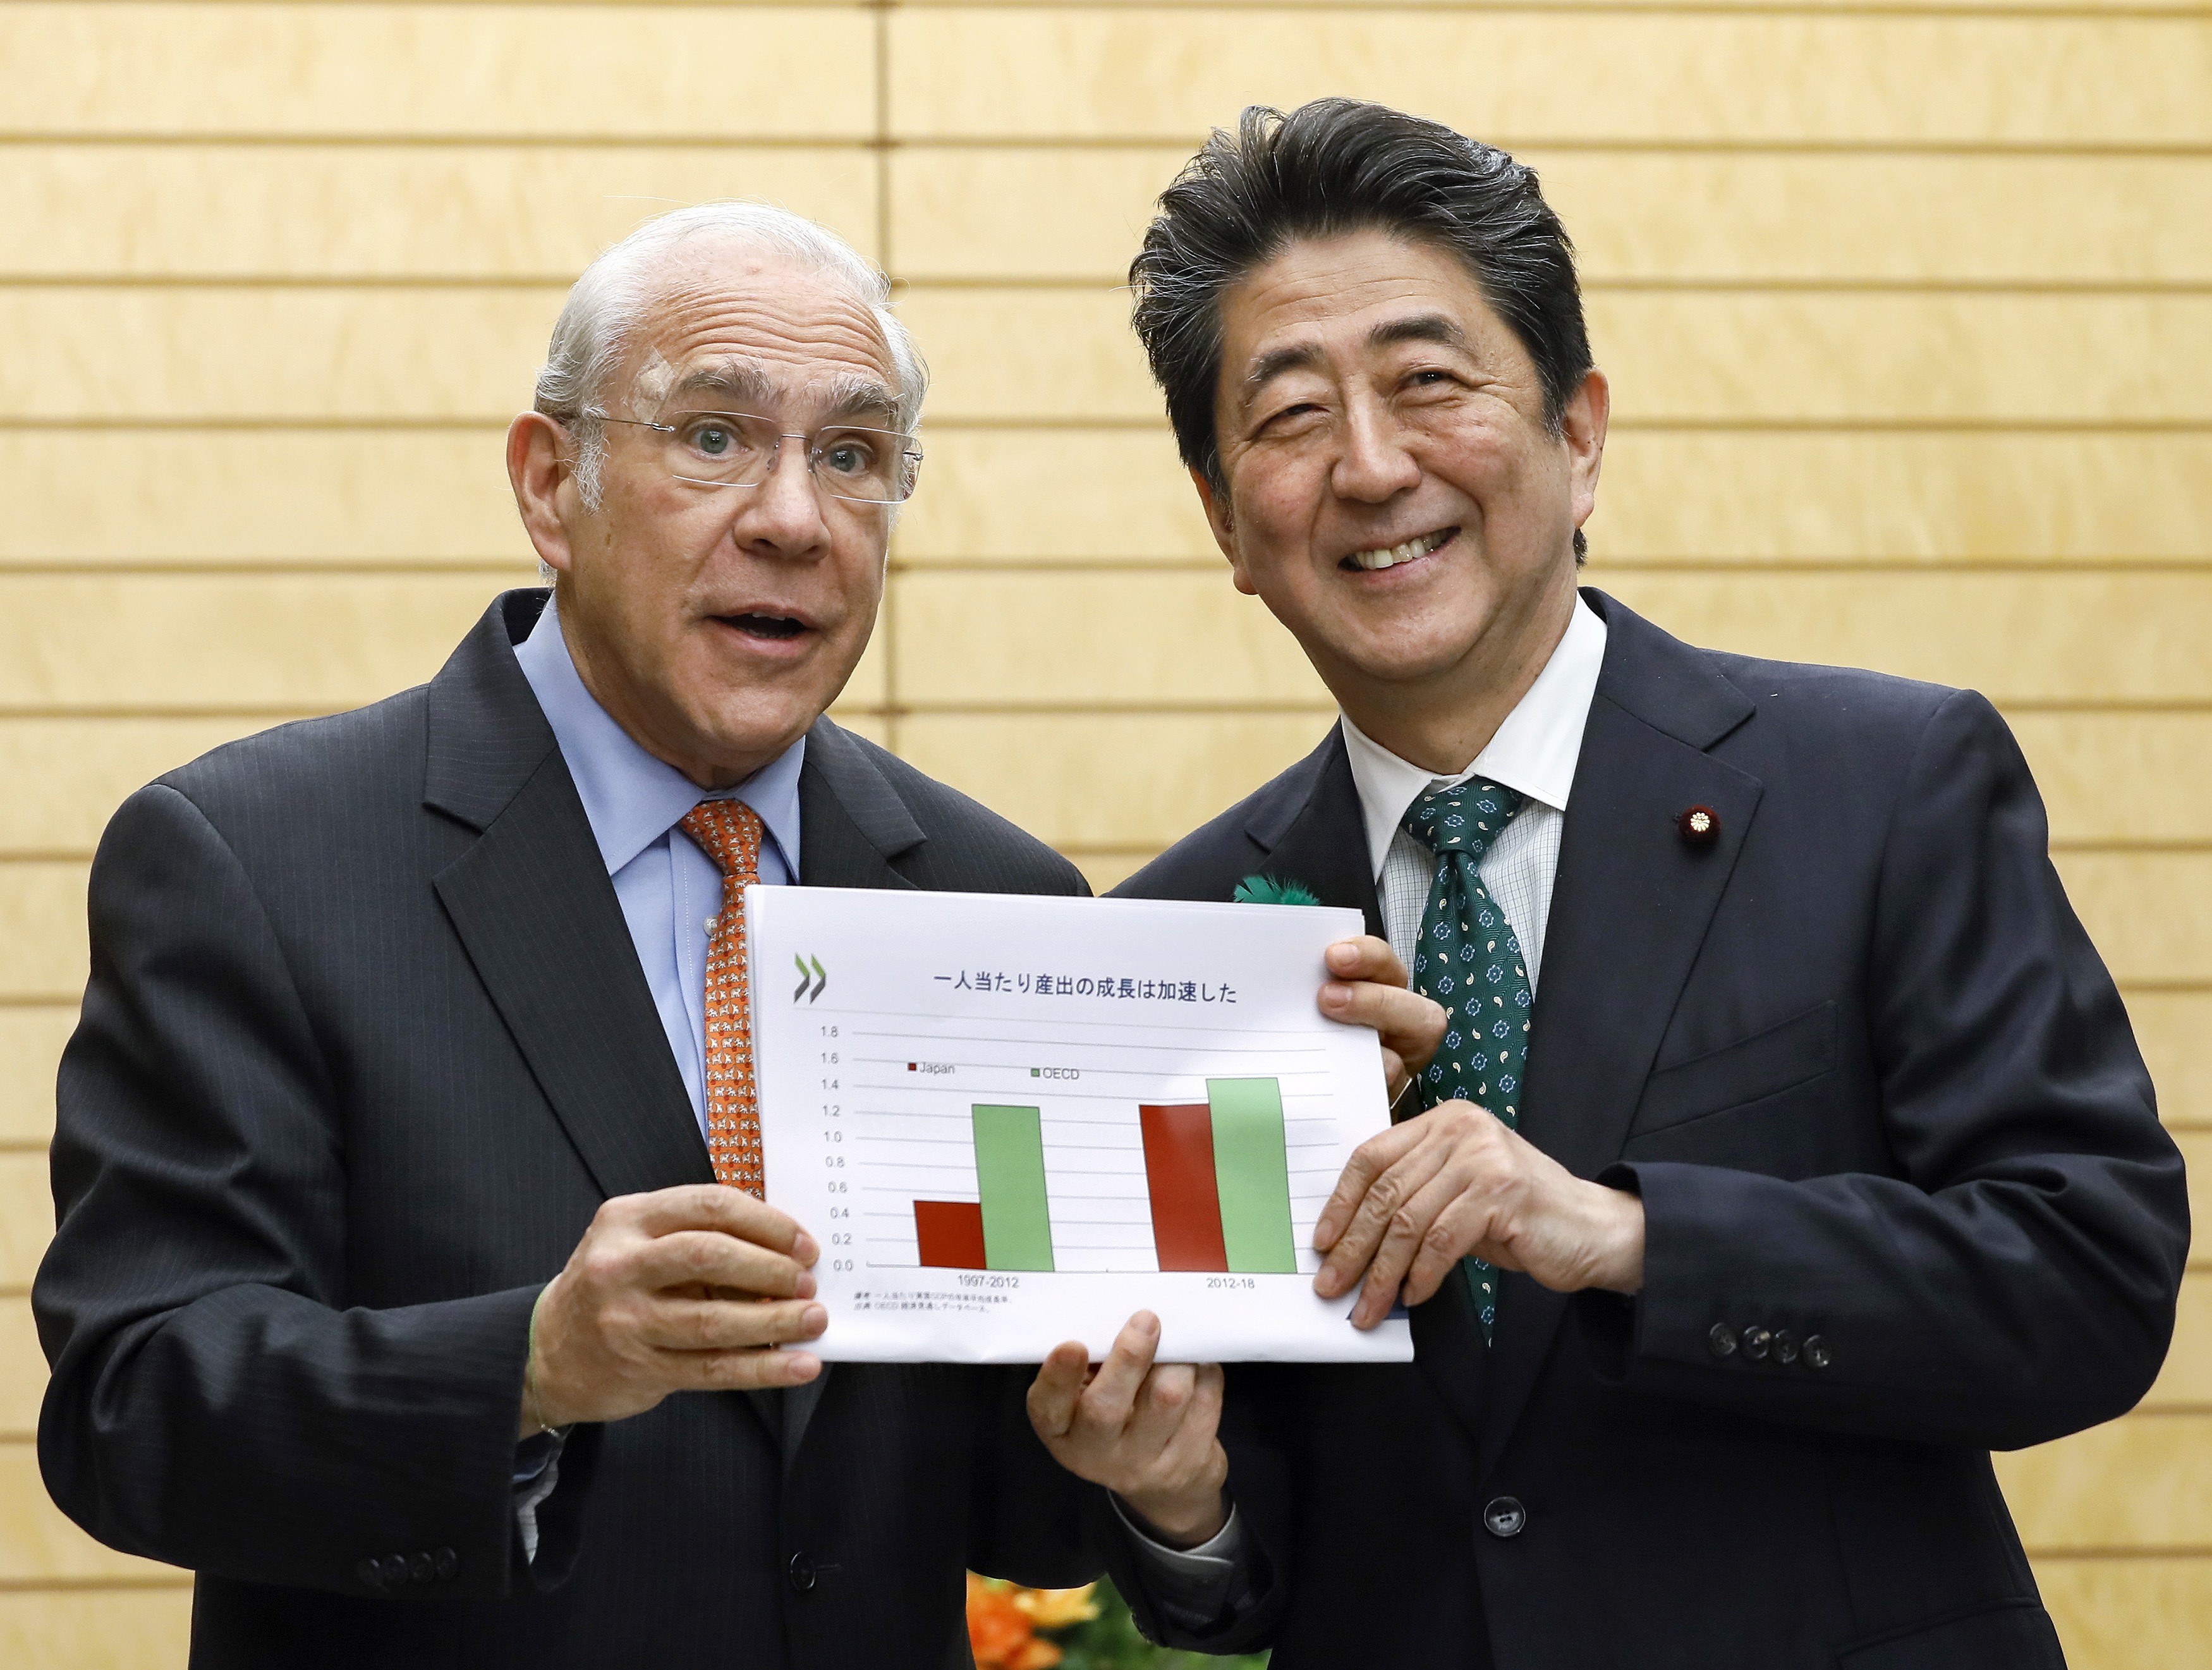 OECD secretary general Ángel Gurría shows a GDP growth chart for Japan (red) and the OECD (green) with Japanese Prime Minister Shinzo Abe during a courtesy call at the prime minister’s official residence in Tokyo on April 15. The Organisation for Economic Co-operation and Development is urging Japan to triple its sales tax, to 26 per cent, to achieve a large primary surplus. Photo: AP